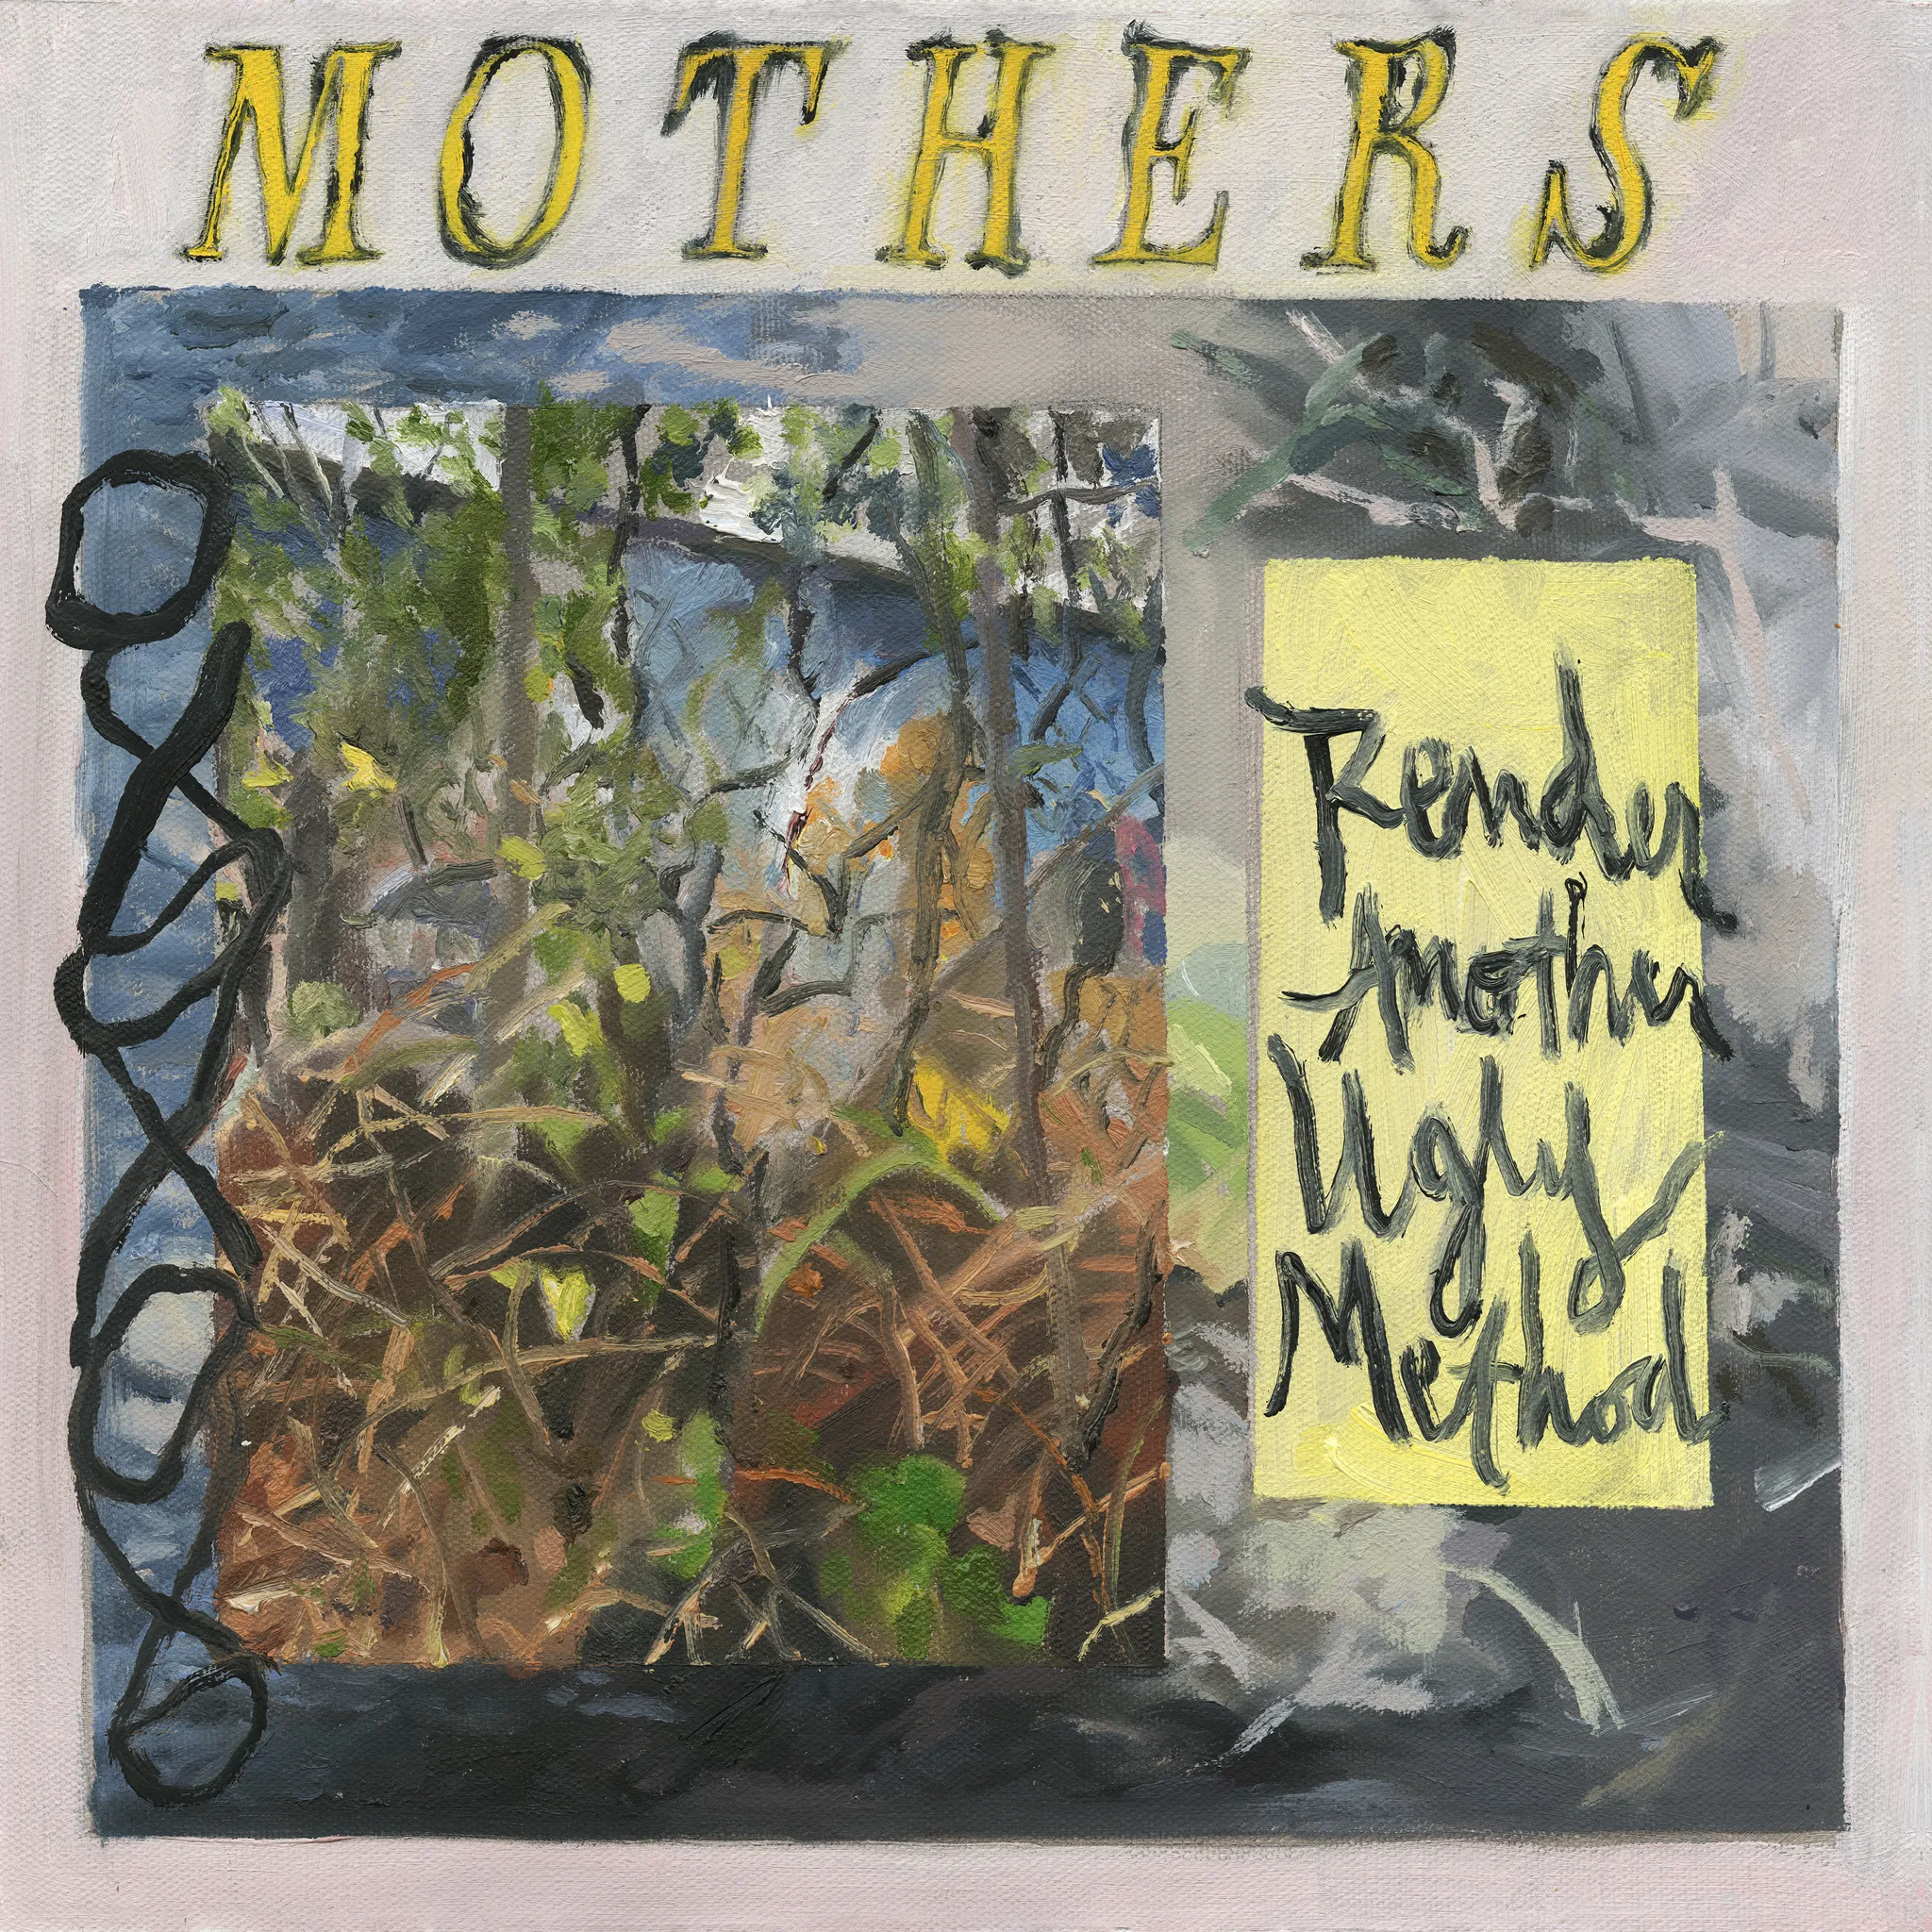 <strong>Mothers - Render Another Ugly Method</strong> (Vinyl LP - black)